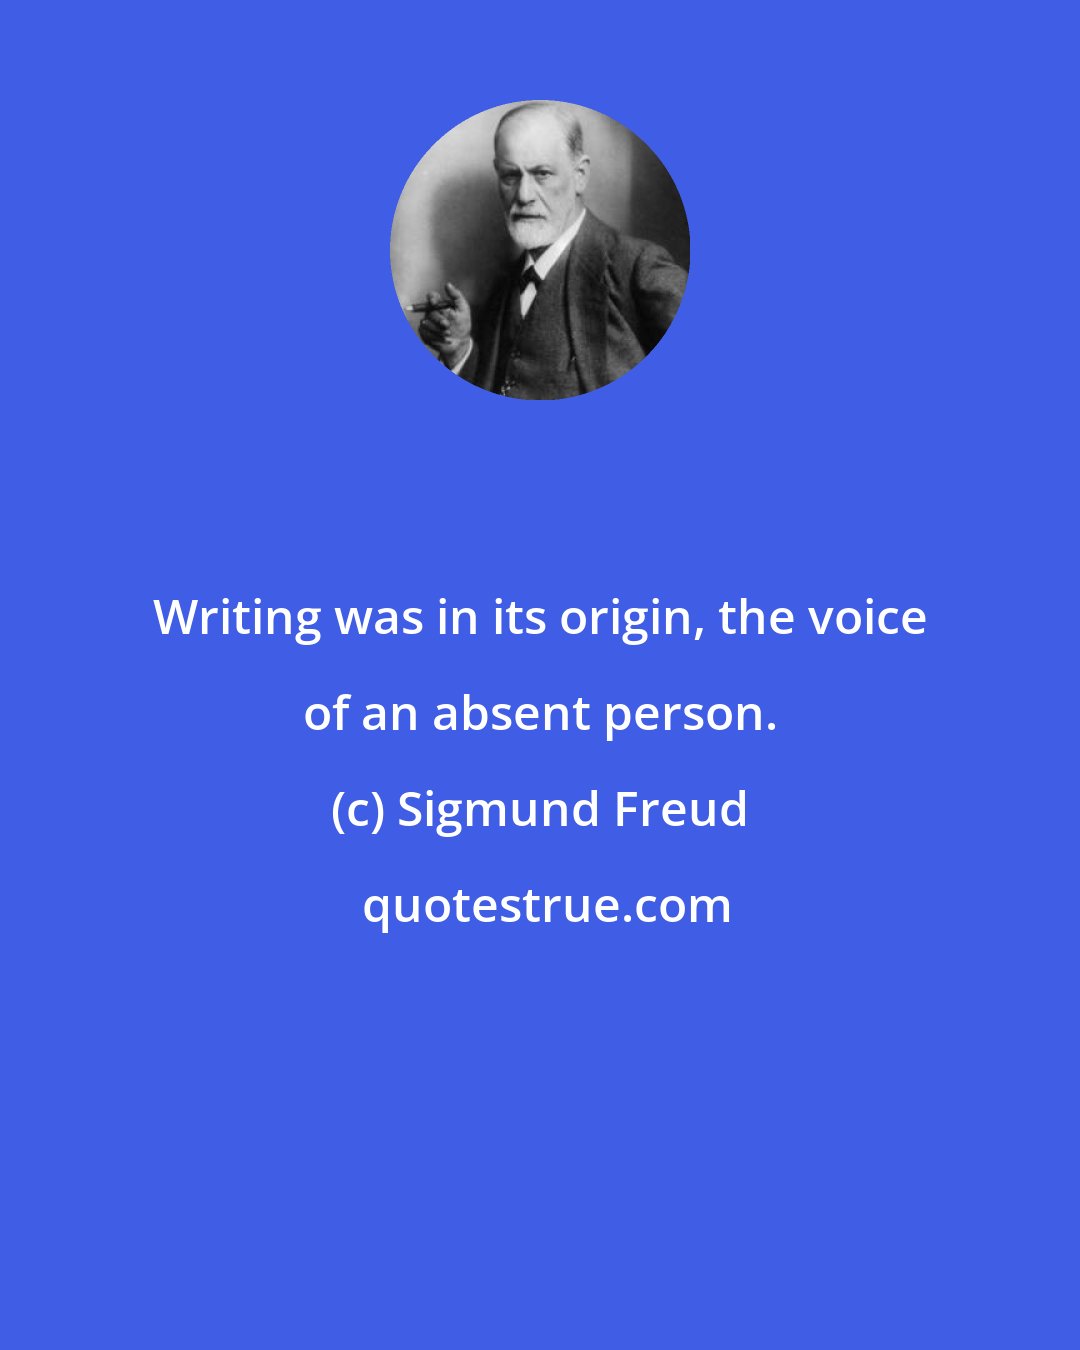 Sigmund Freud: Writing was in its origin, the voice of an absent person.